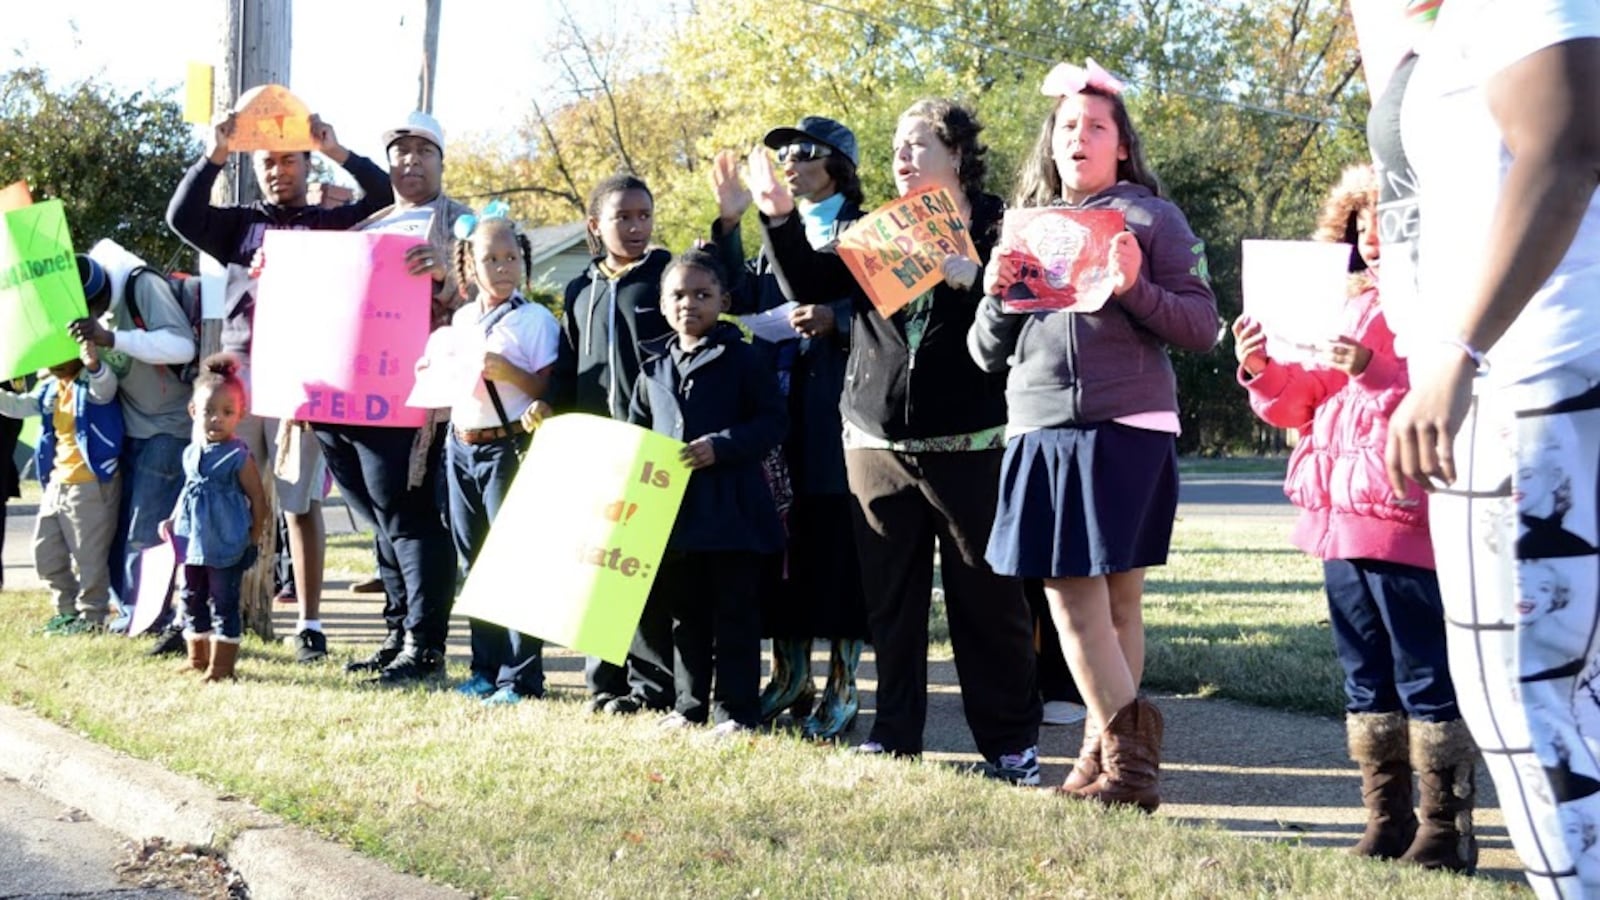 Students and parents line the street in November to protest the proposed takeover of Sheffield Elementary School by the Achievement School. The state-run district later removed the Memphis school from its takeover list for 2016-17.